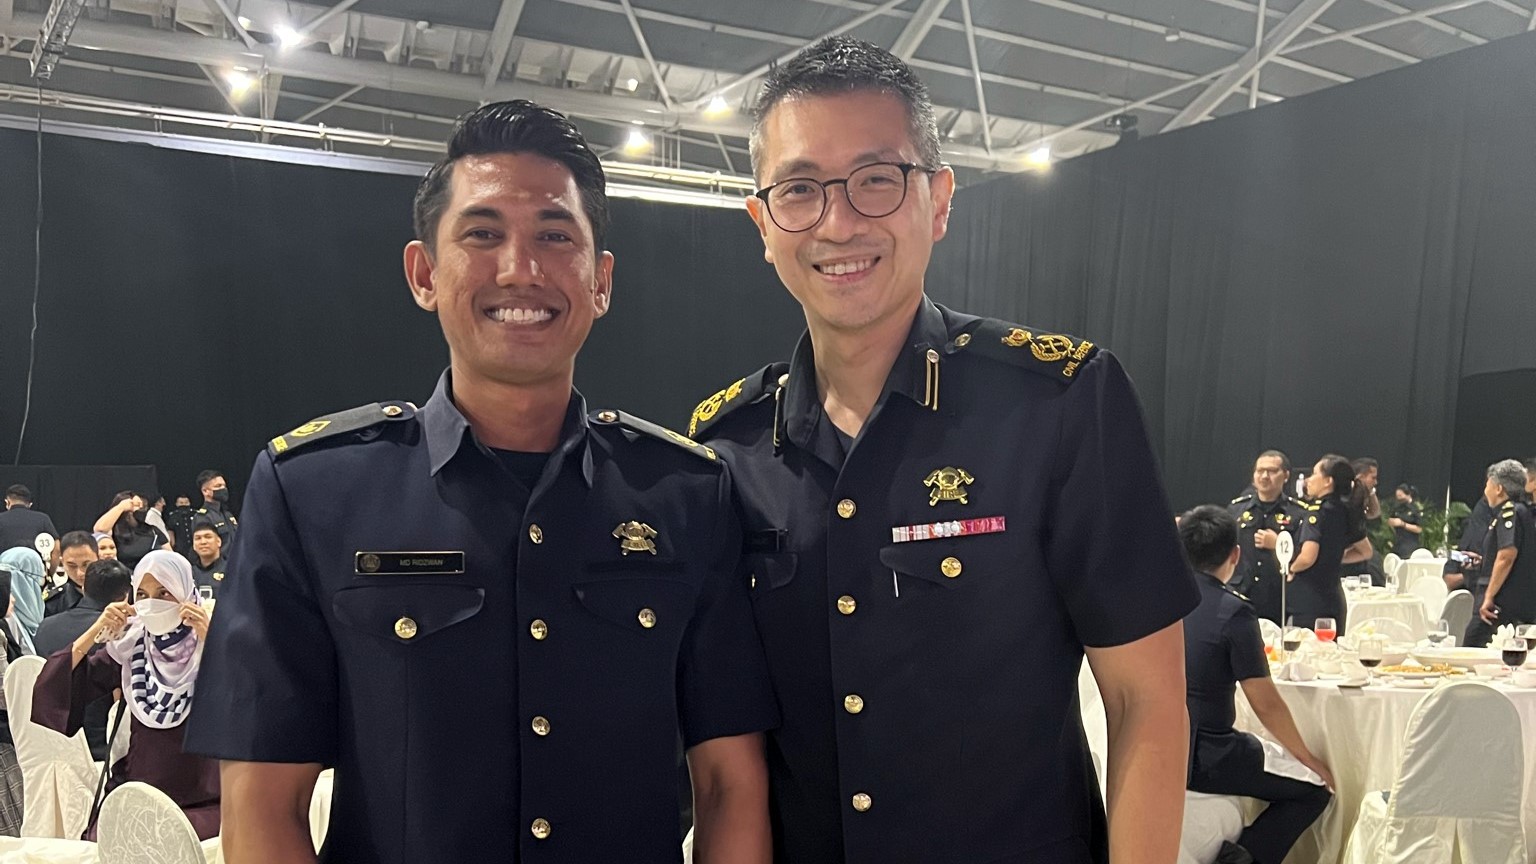 WO2 (NS) Muhammad Ridzwan Bin Baharudin (left), seen here at an event with DC Daniel Seet, Deputy Commissioner (Operations & Resilience), SCDF, says the sense of discipline that was instilled in him during NS helped him as an adult.